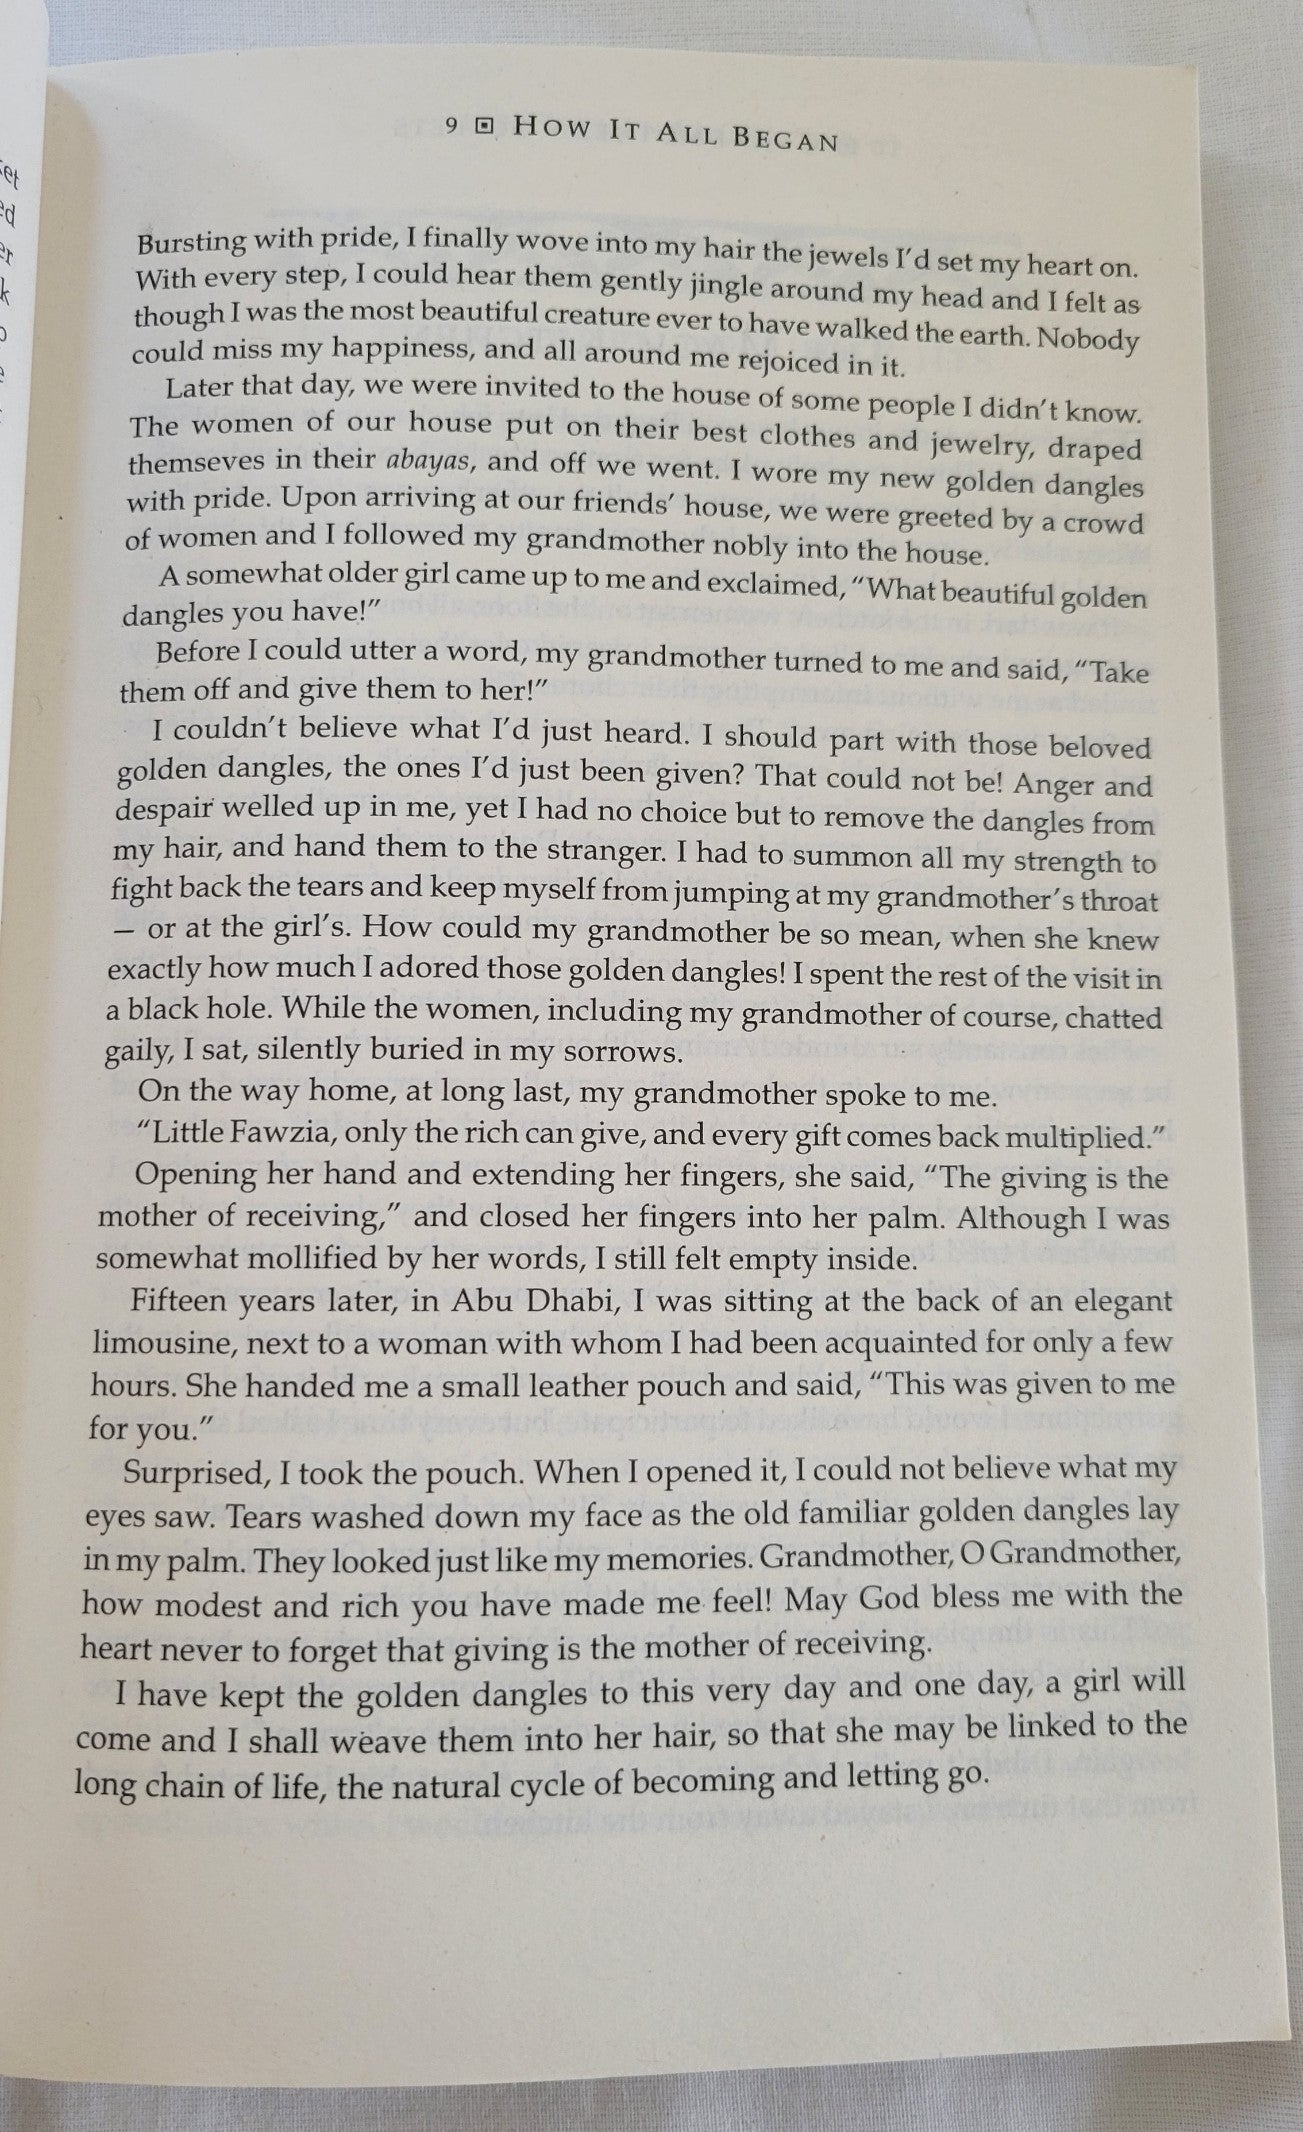 Used book for sale “Grandmother's Secrets: The Ancient Rituals and Healing Power of Belly Dancing” written by Rosina-Fawzia Al-Rawi, translated by Monique Arav.  View of page 9